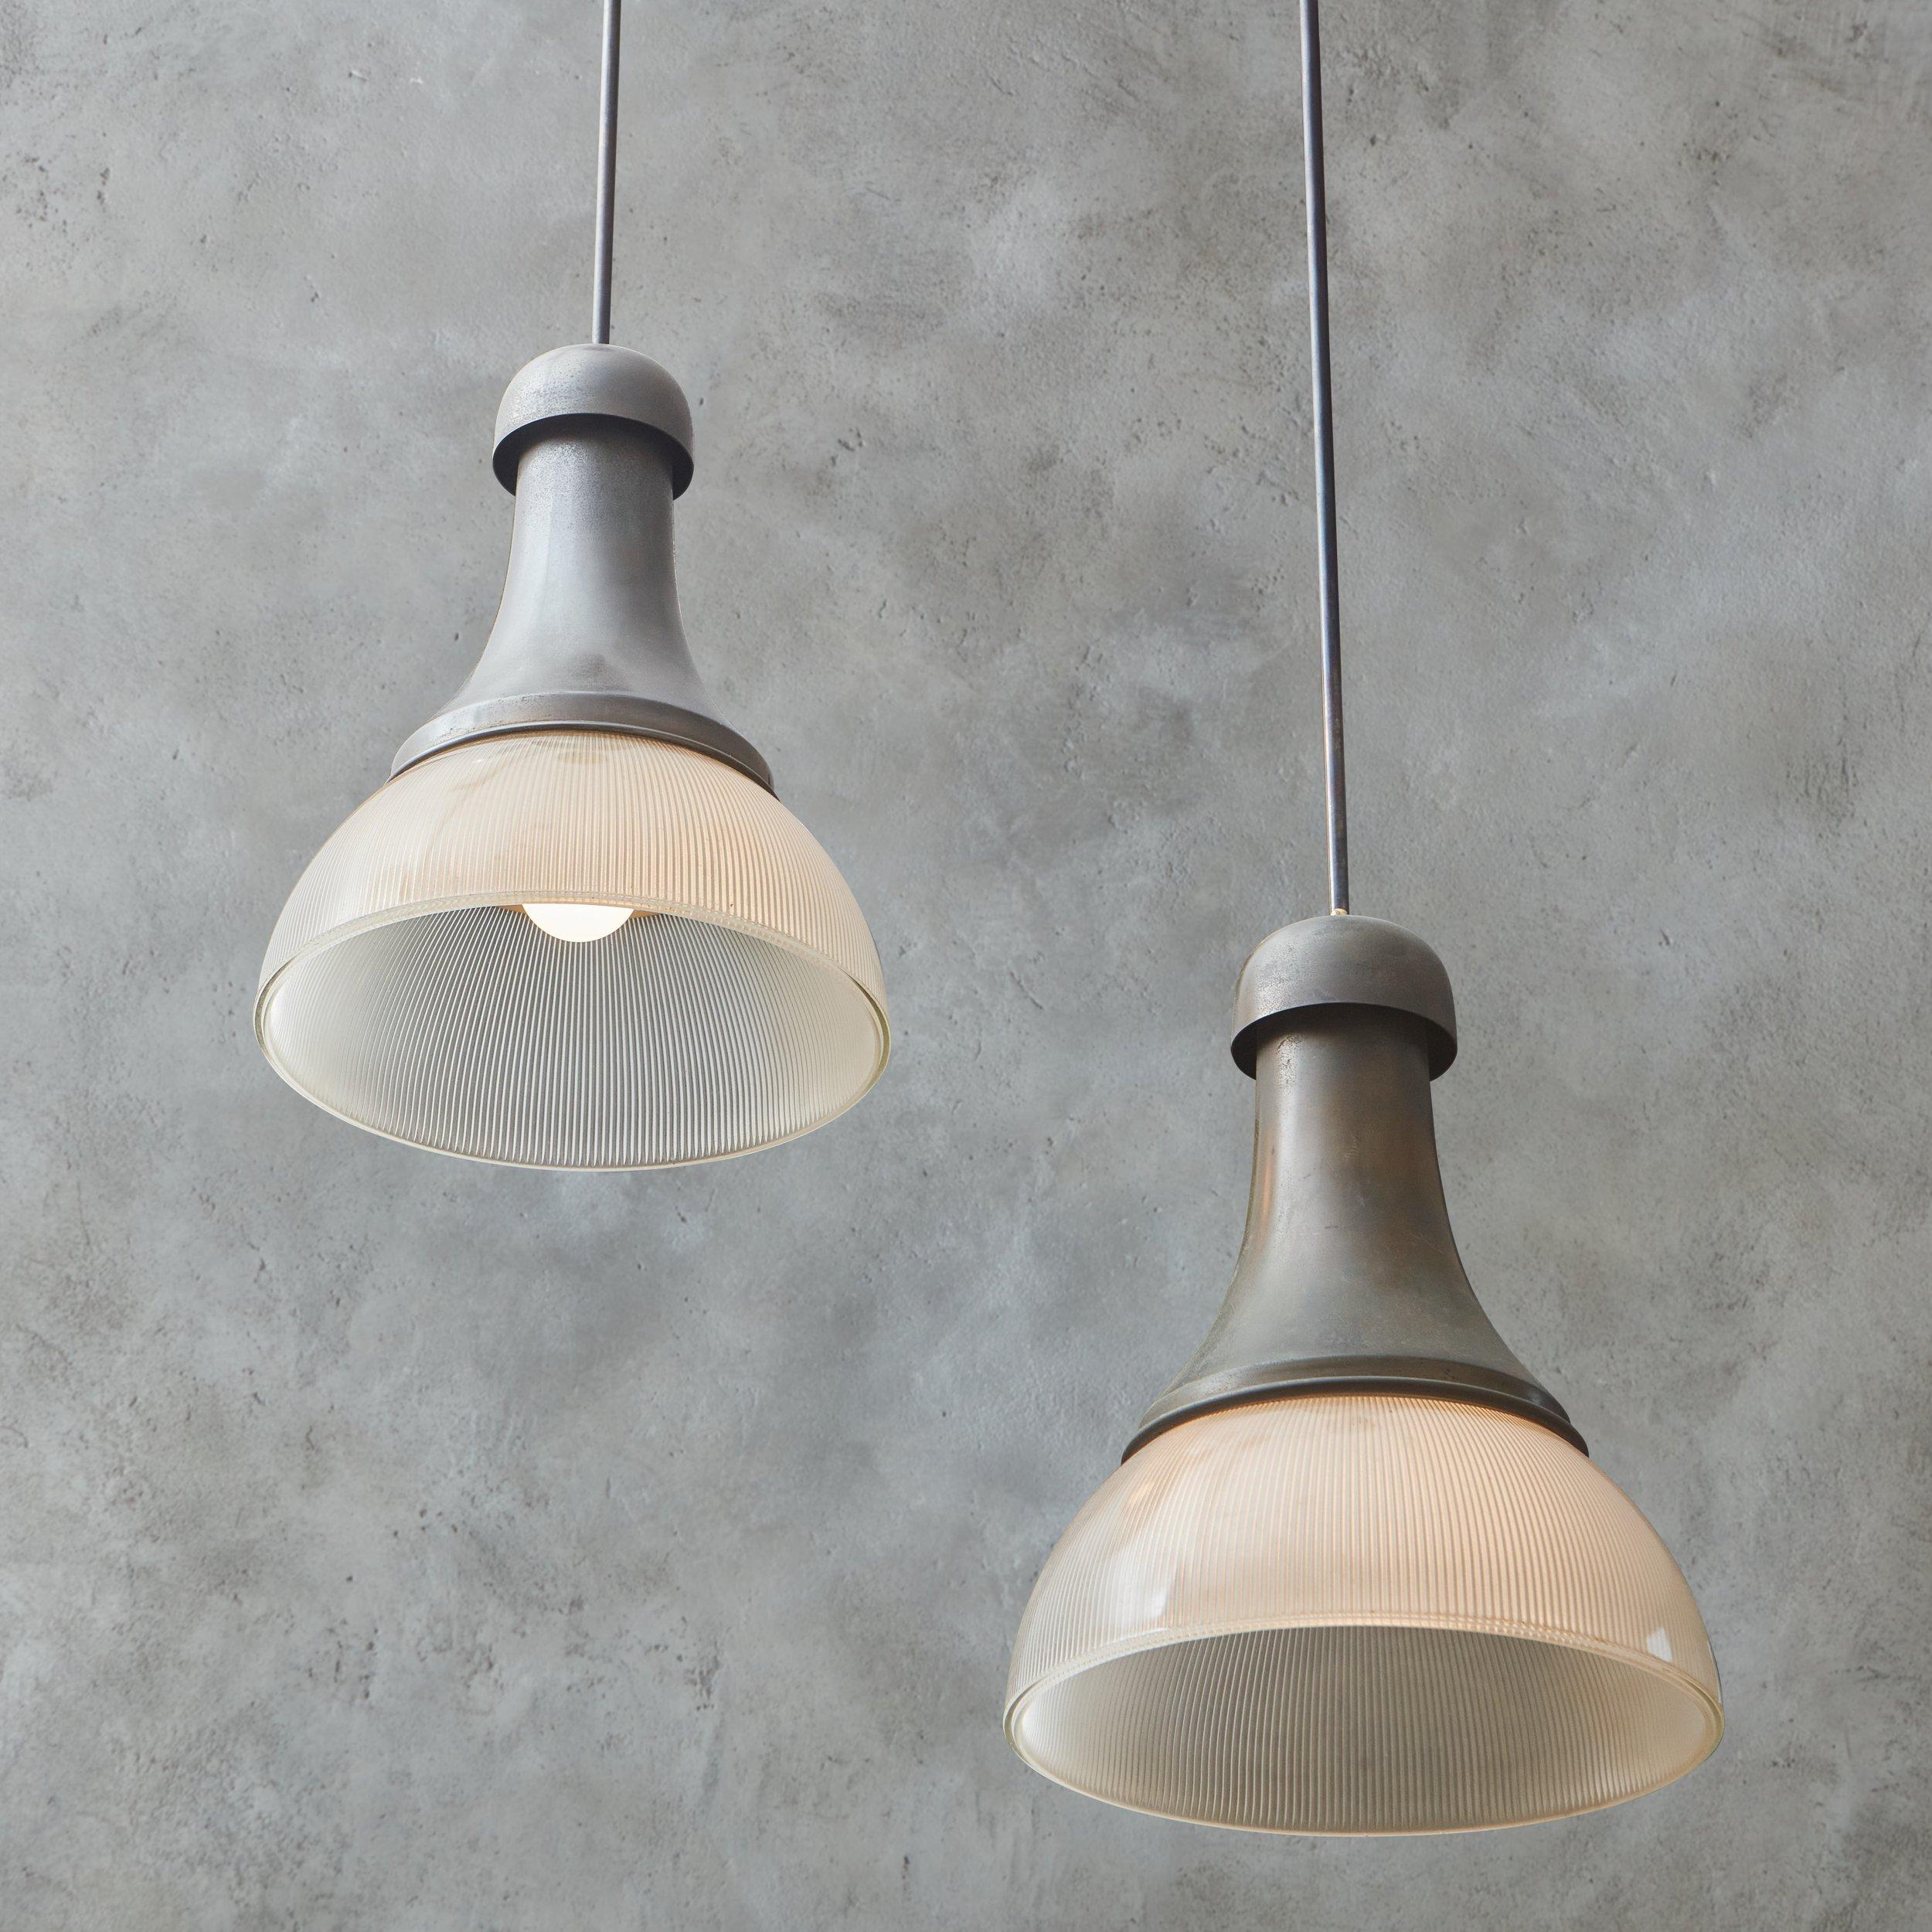 A pair of 1960s Italian pendant lights in the style of Sergio Mazza. These fixtures were constructed with patinated metal and feature beautiful fluted glass shades. They hang from 2’ metal stems and have new brass canopies with an antique finish.